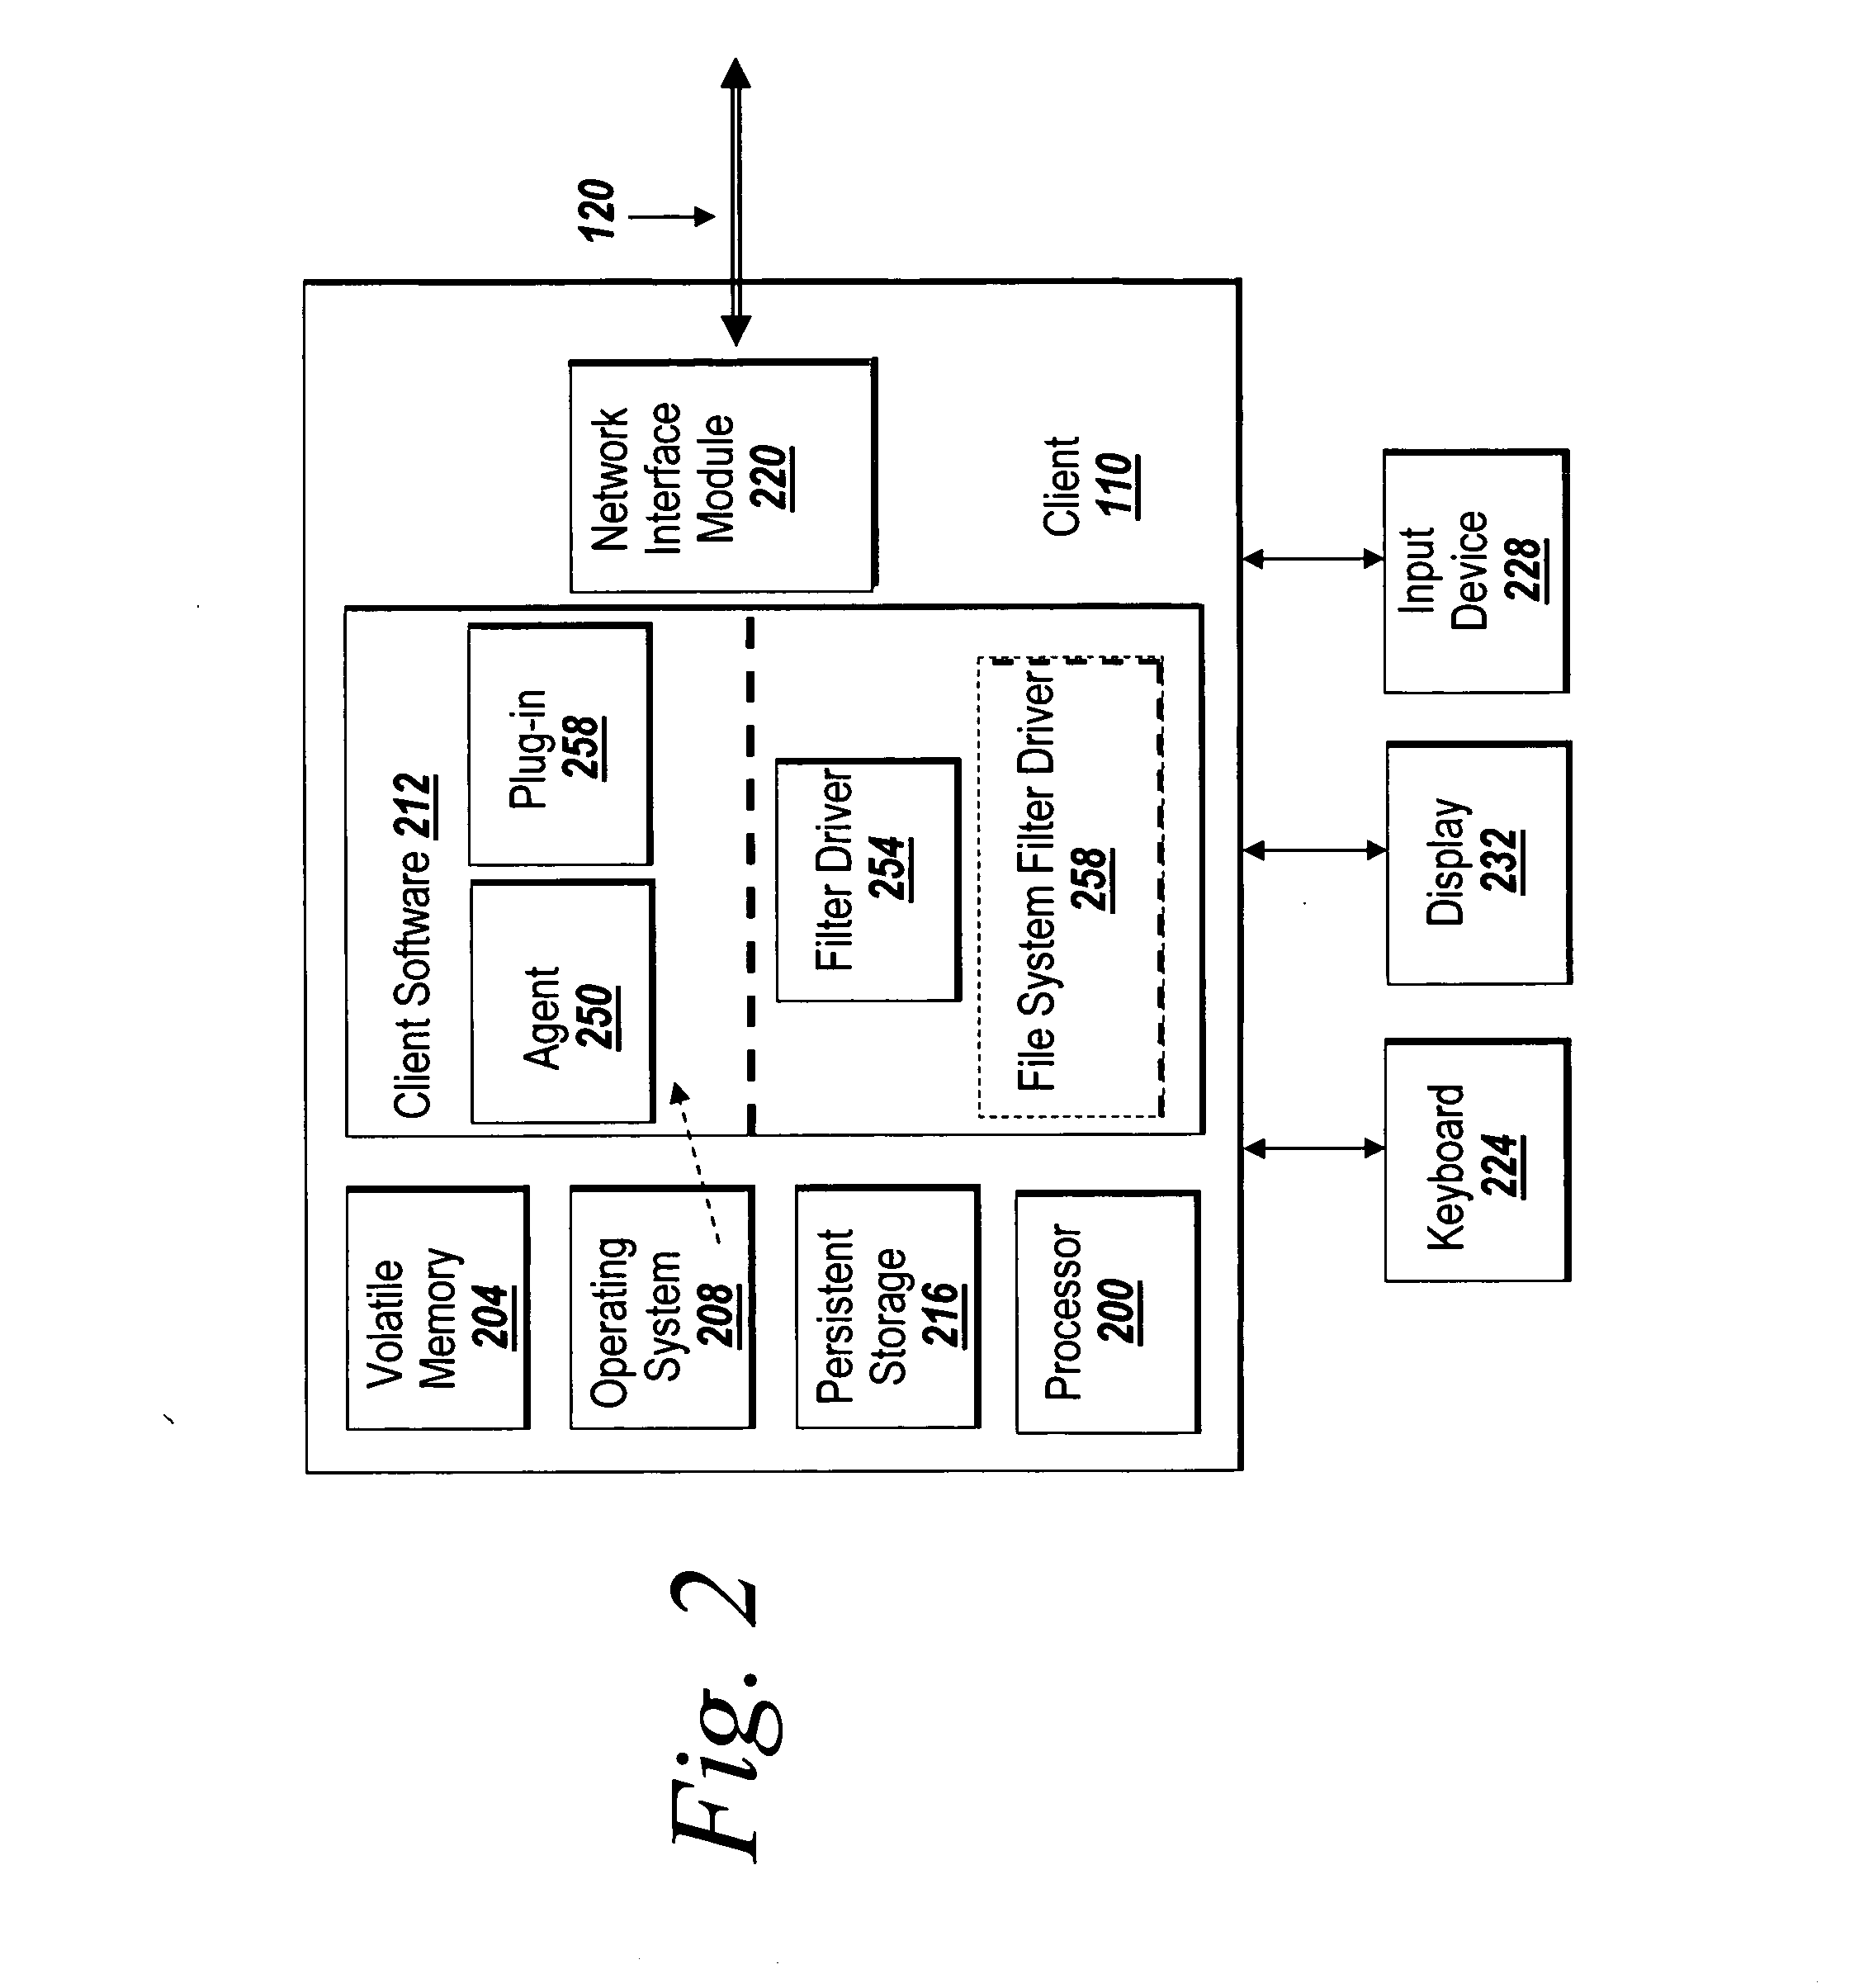 Systems and methods for expiring digital assets based on an assigned expiration date